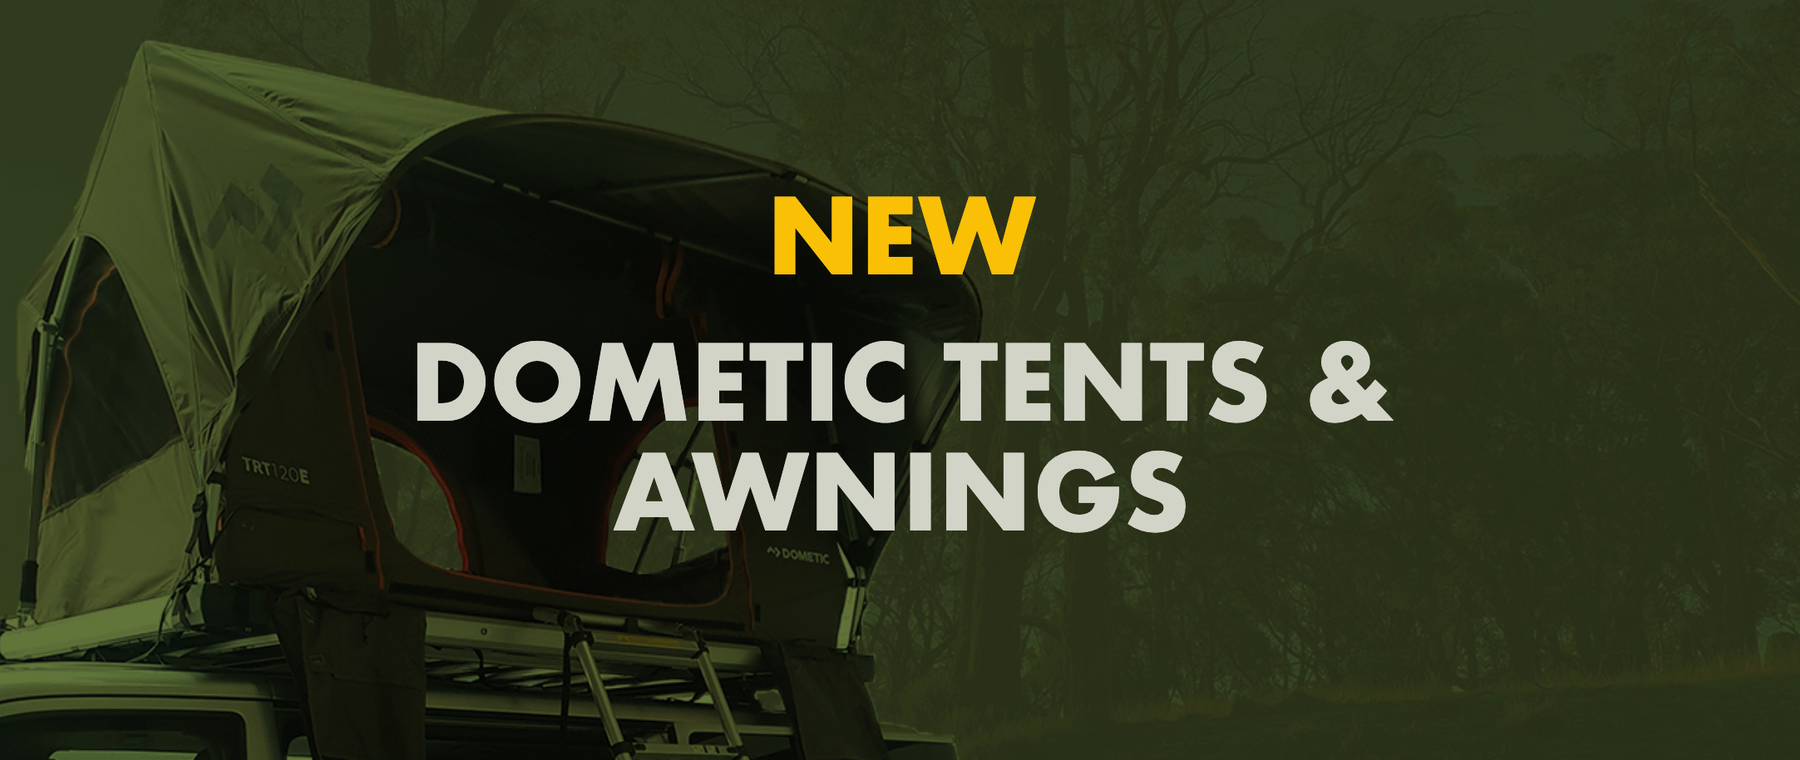 NEW DOMETIC TENTS & AWNINGS